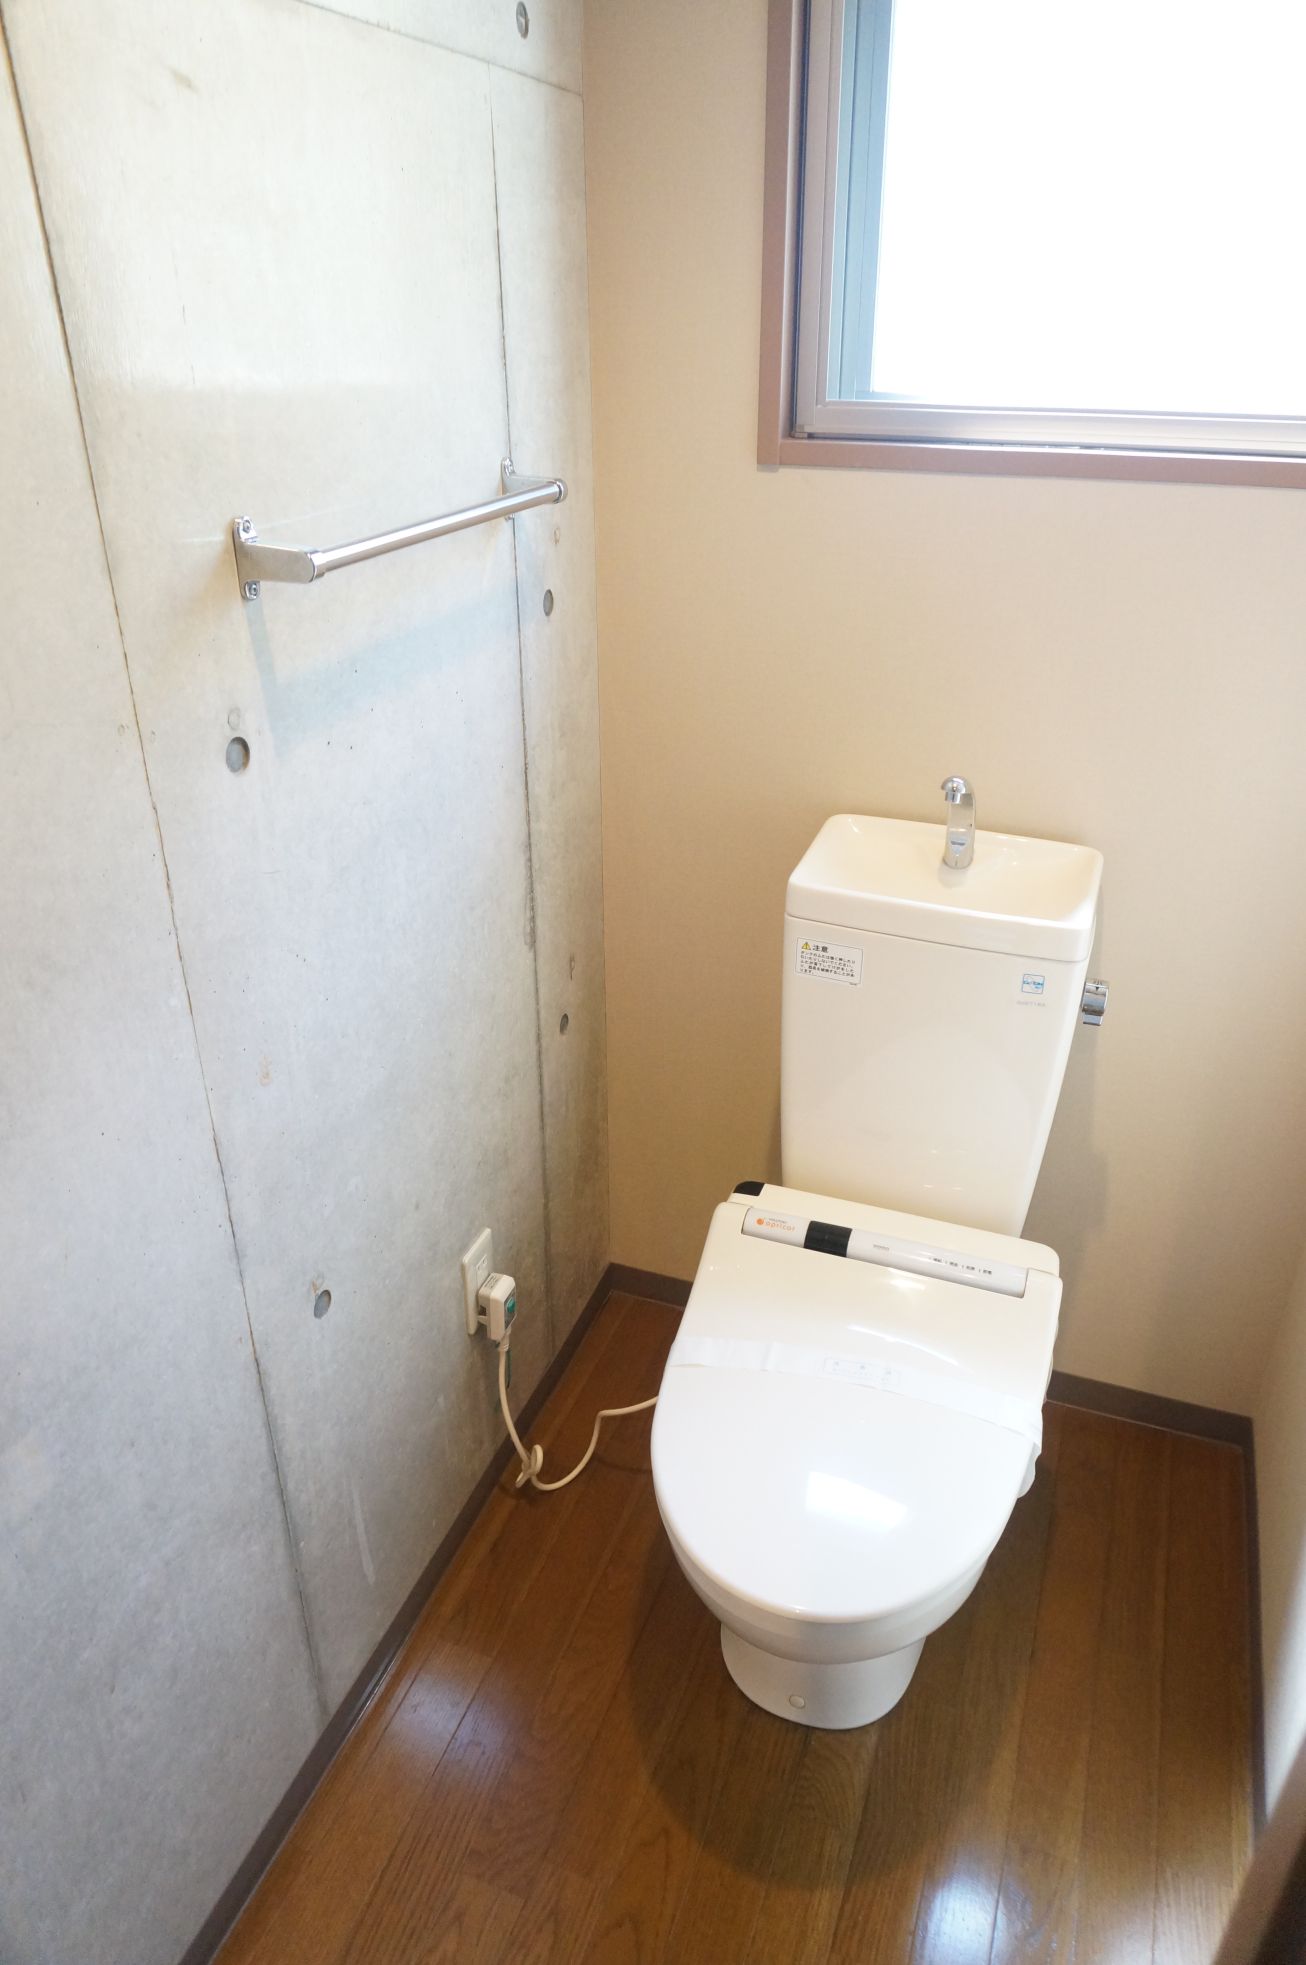 Toilet. There is a small window, With Washlet